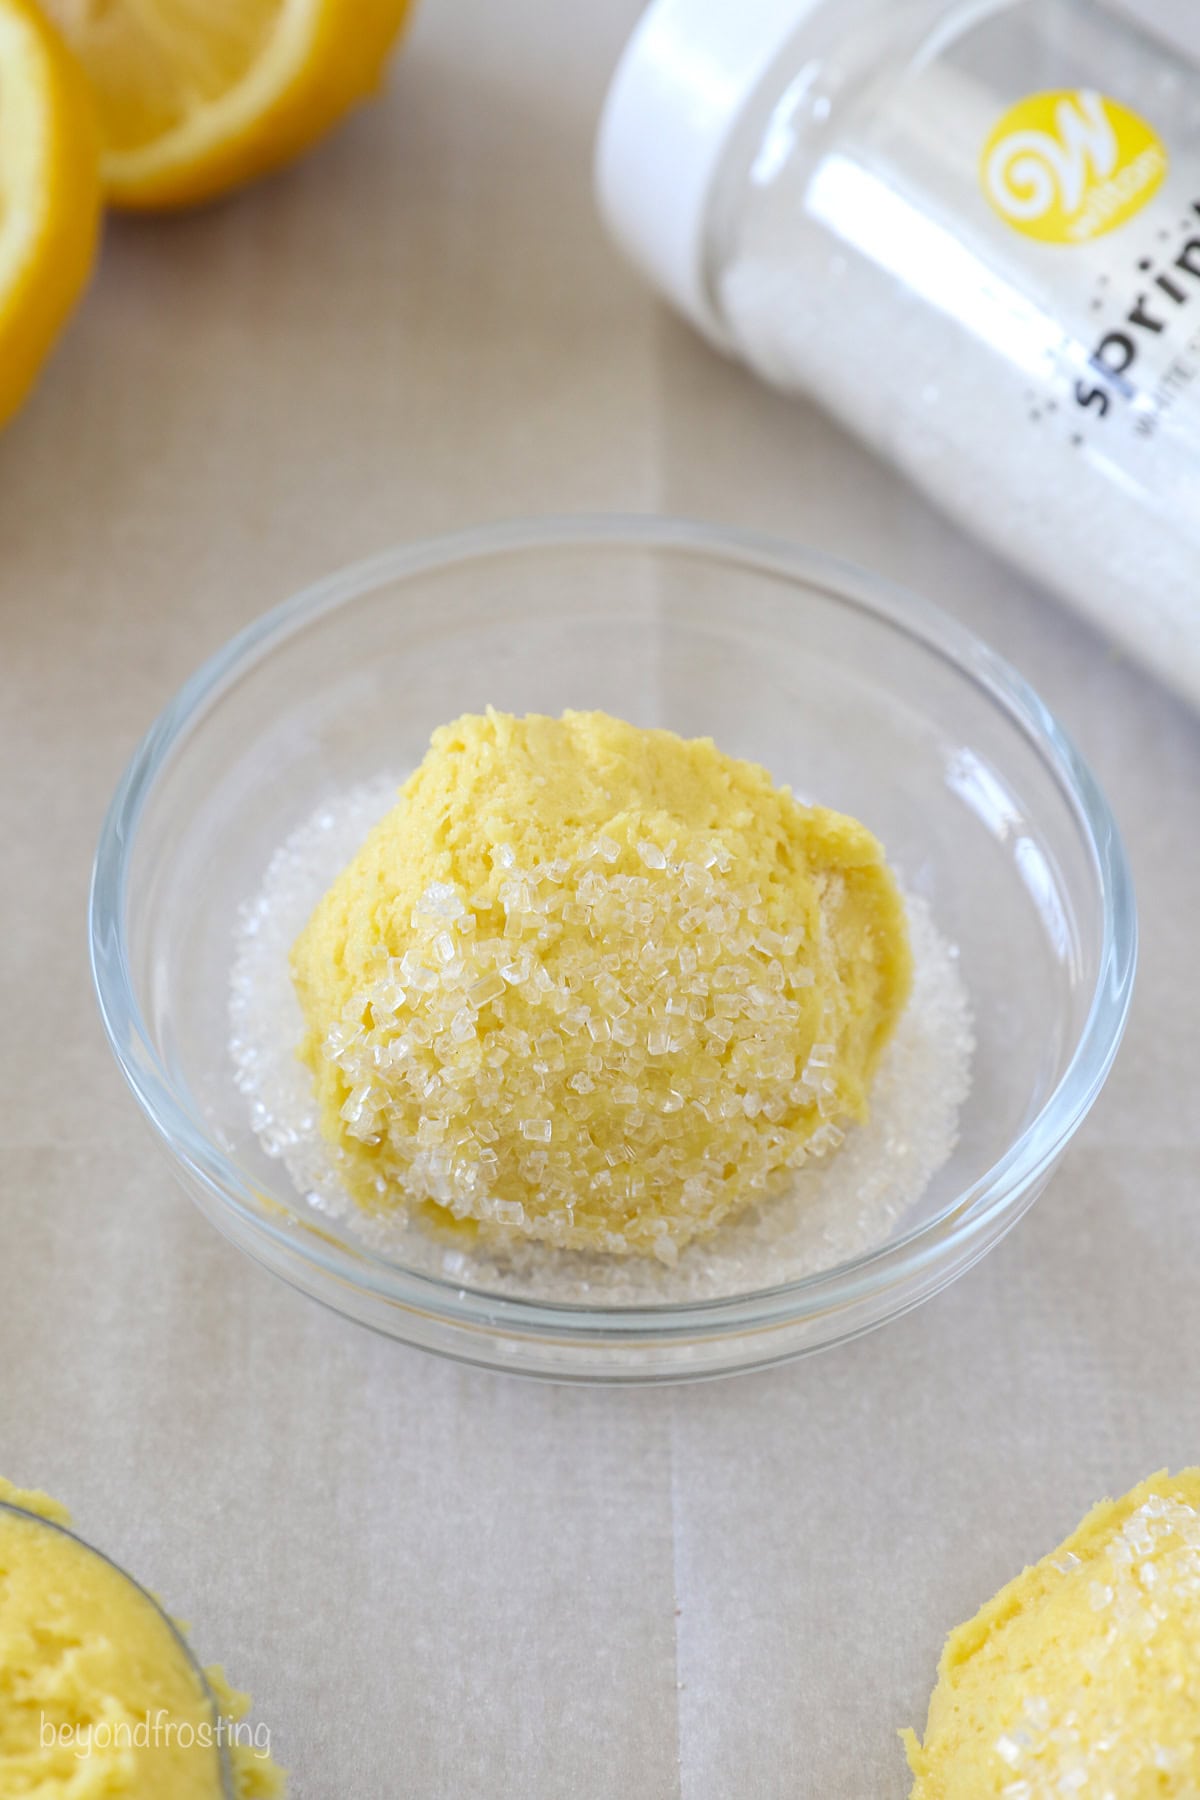 A ball of lemon cookie dough resting in a small glass bowl of sanding sugar.